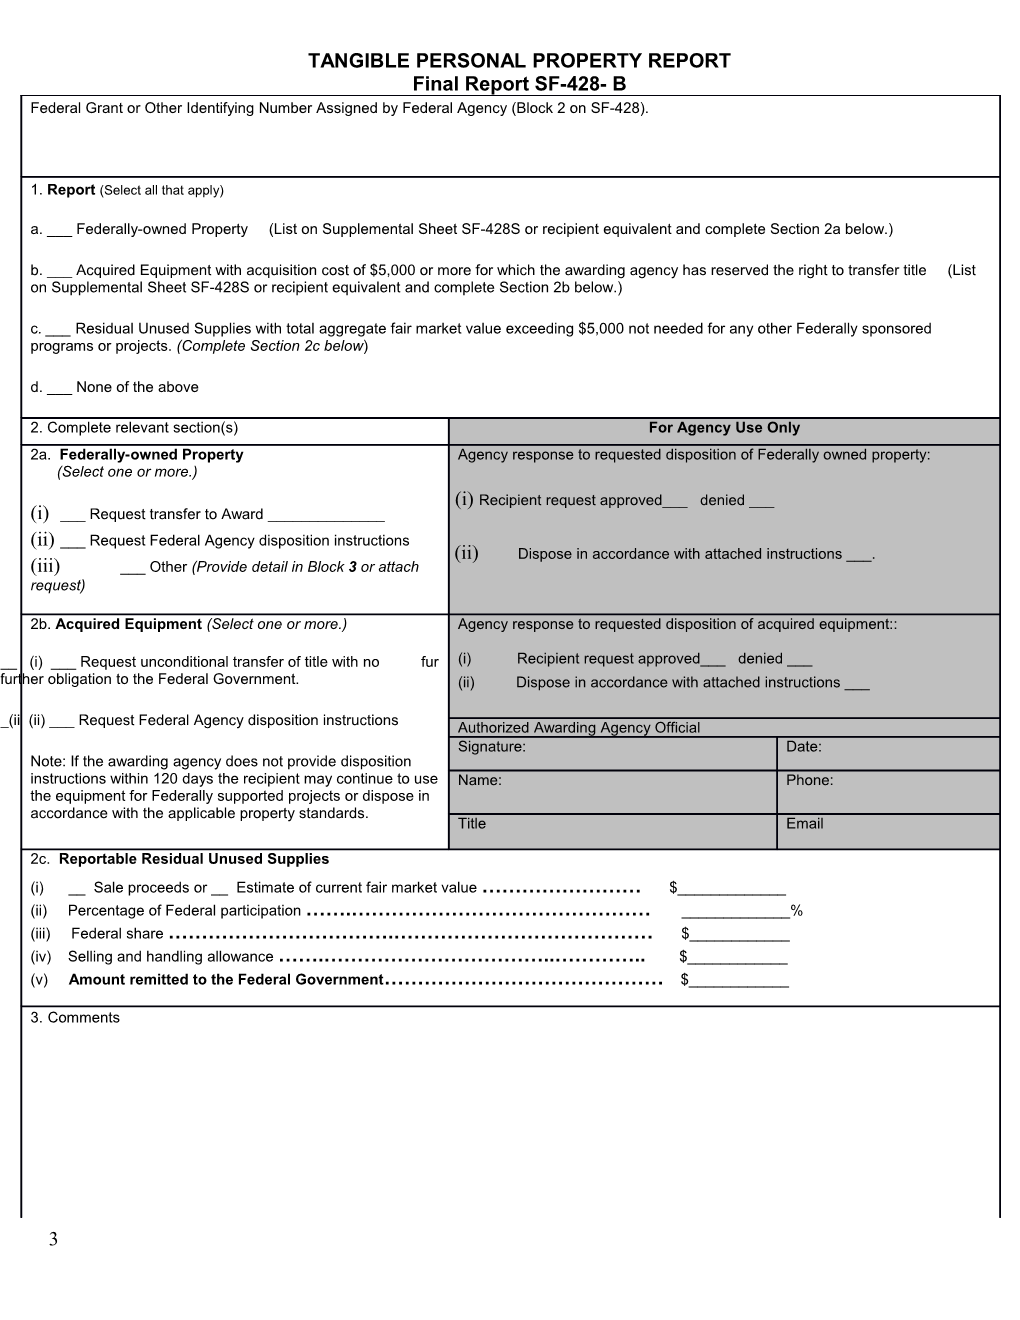 Property Forms, SF-428 Suite